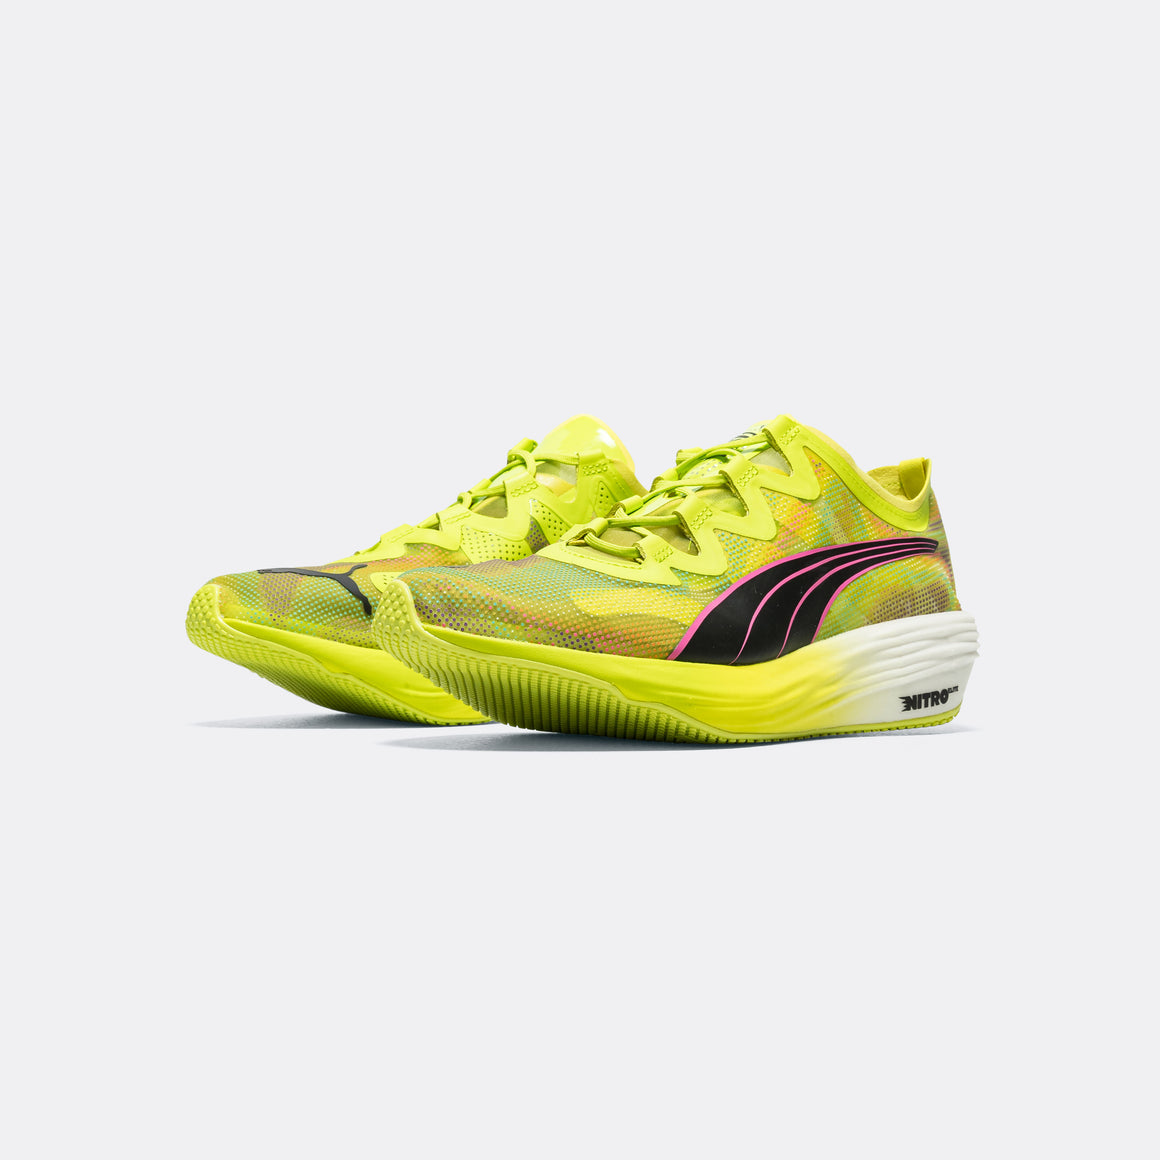 Puma - Mens Fast-FWD NITRO Elite - Psychedelic Rush/Lime - Up There Athletics